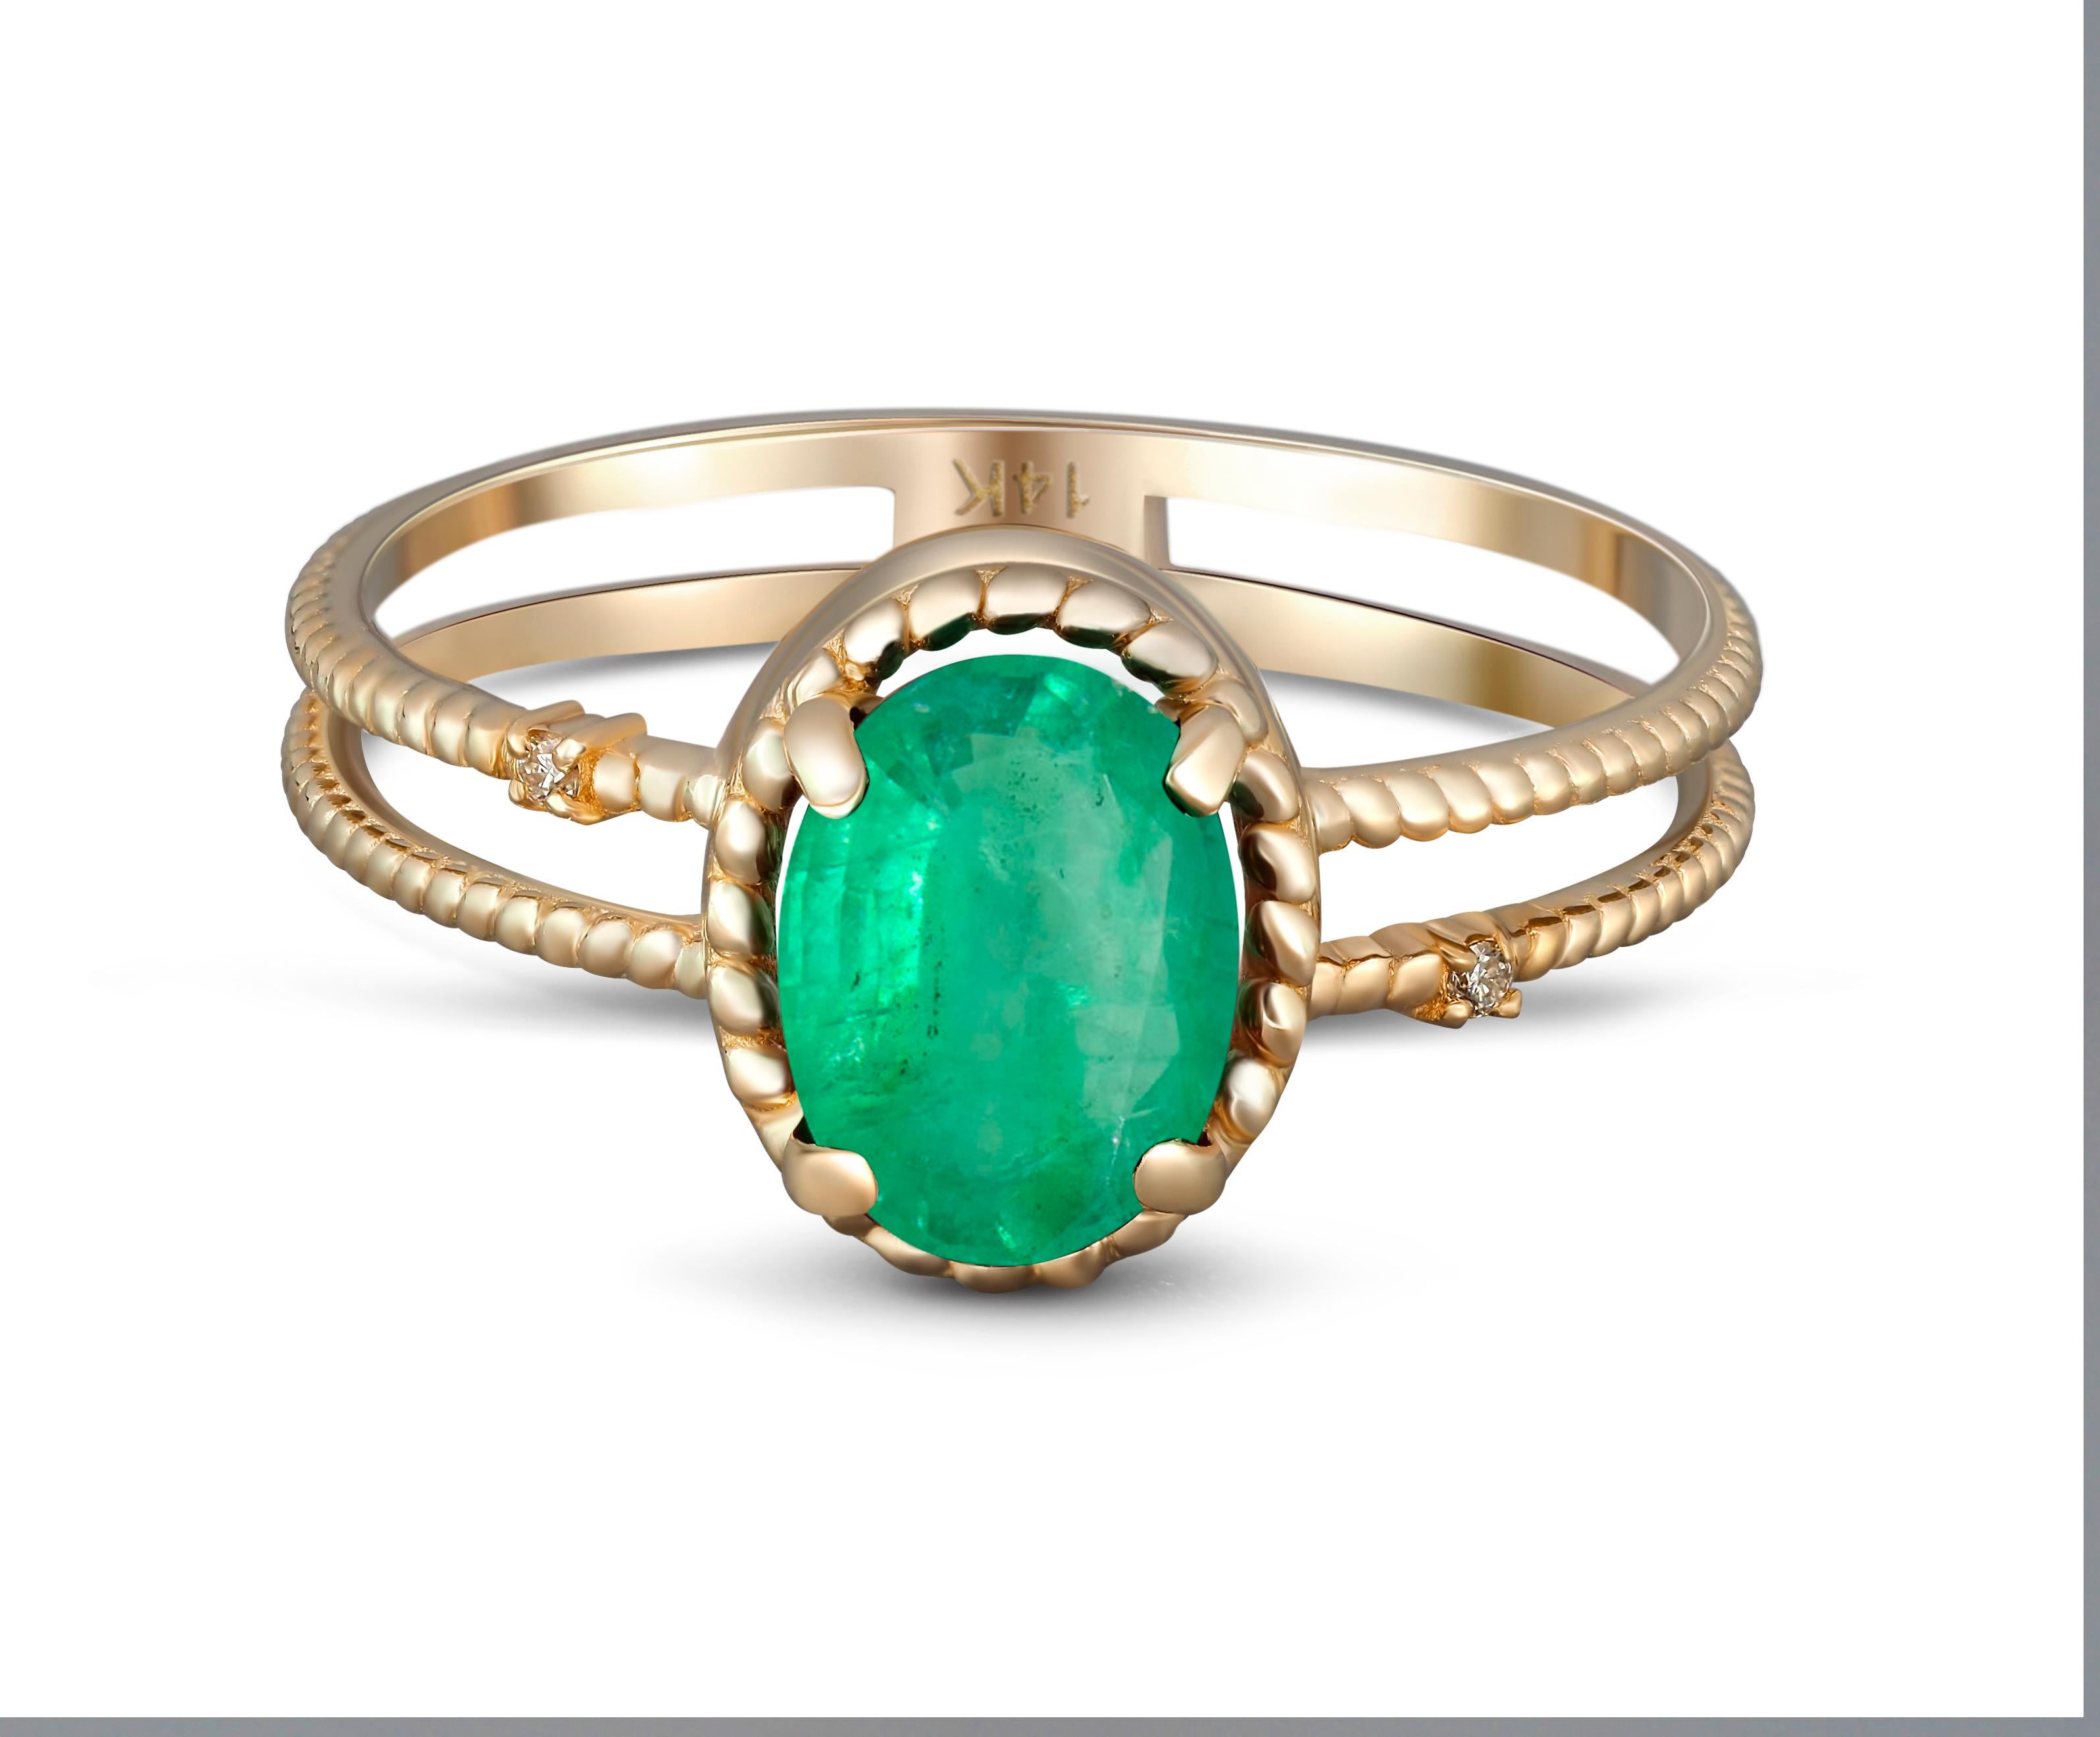 For Sale:  Emerald Gold Ring, Oval Emerald Ring, 14k Gold Ring with Emerald 2